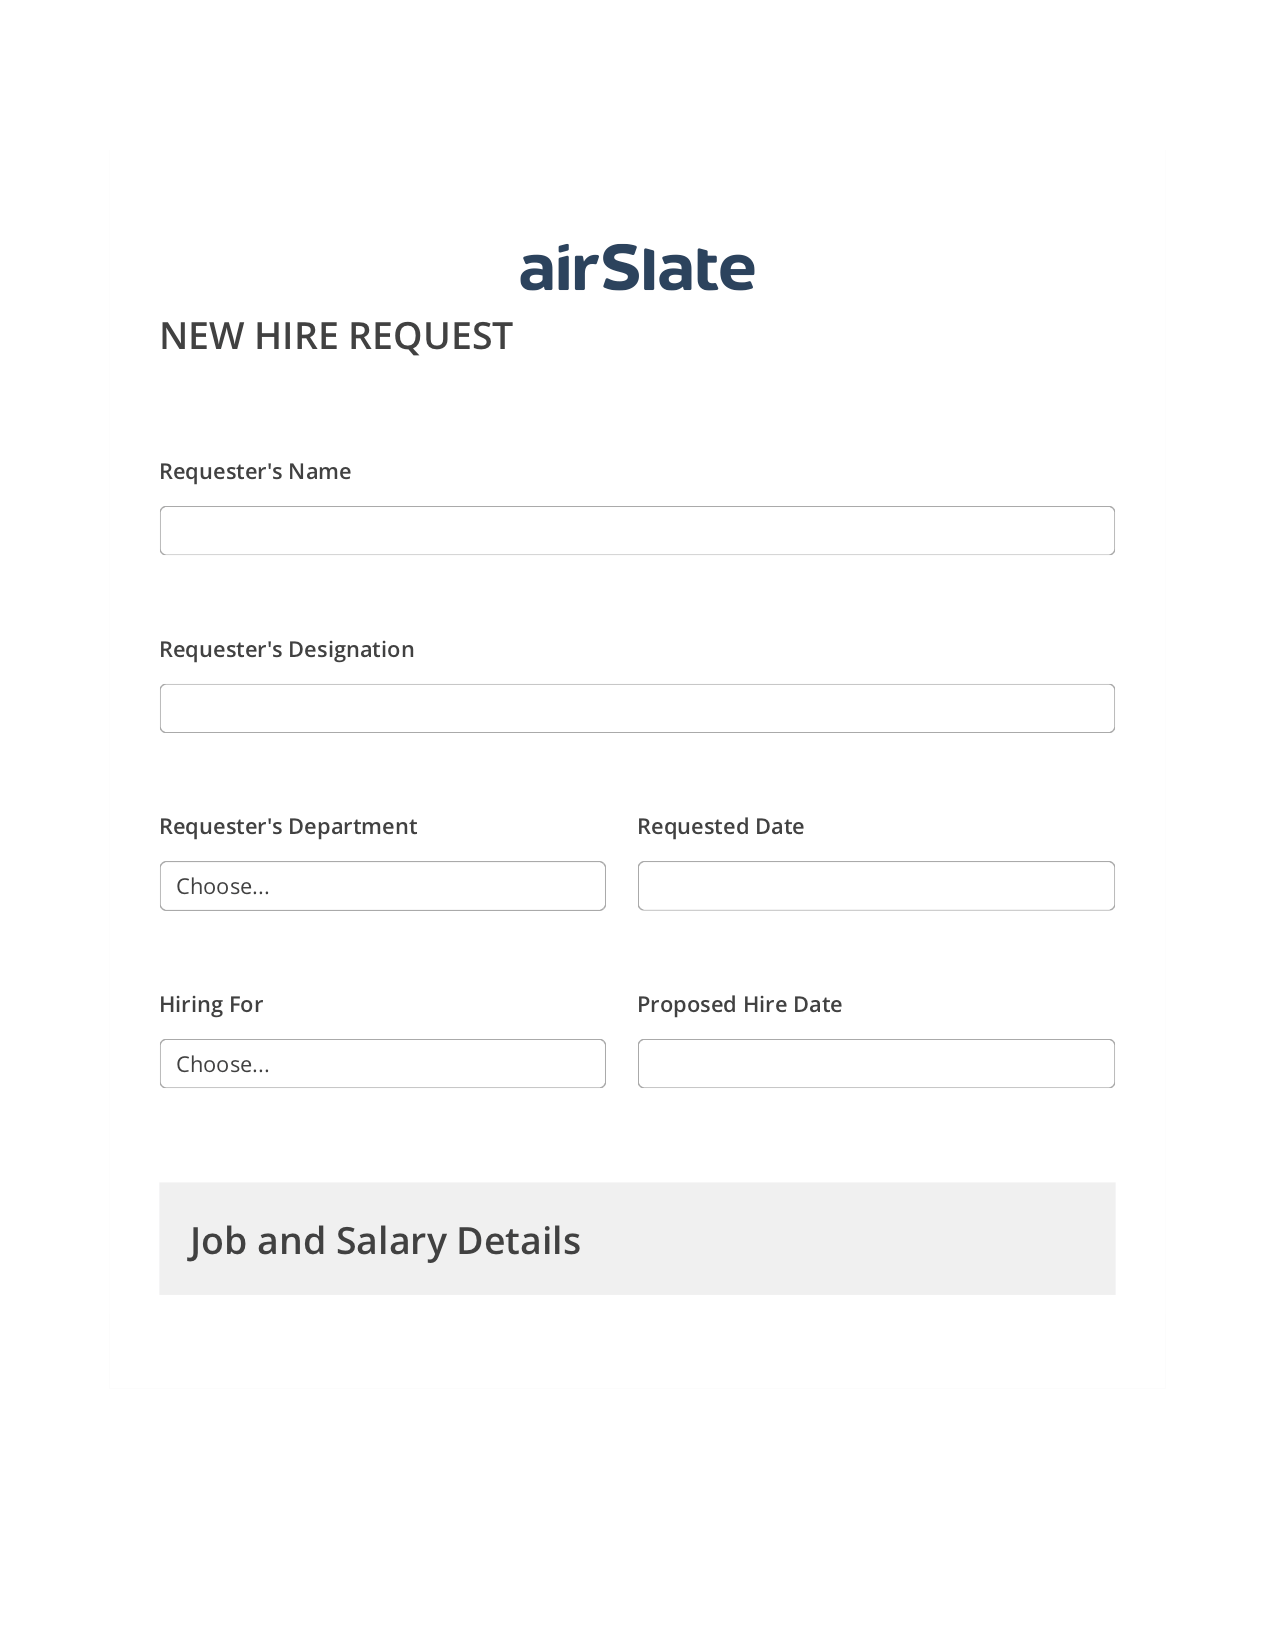 Hiring Request Workflow Pre-fill from another Slate Bot, Set signature type addon, Export to MySQL Bot